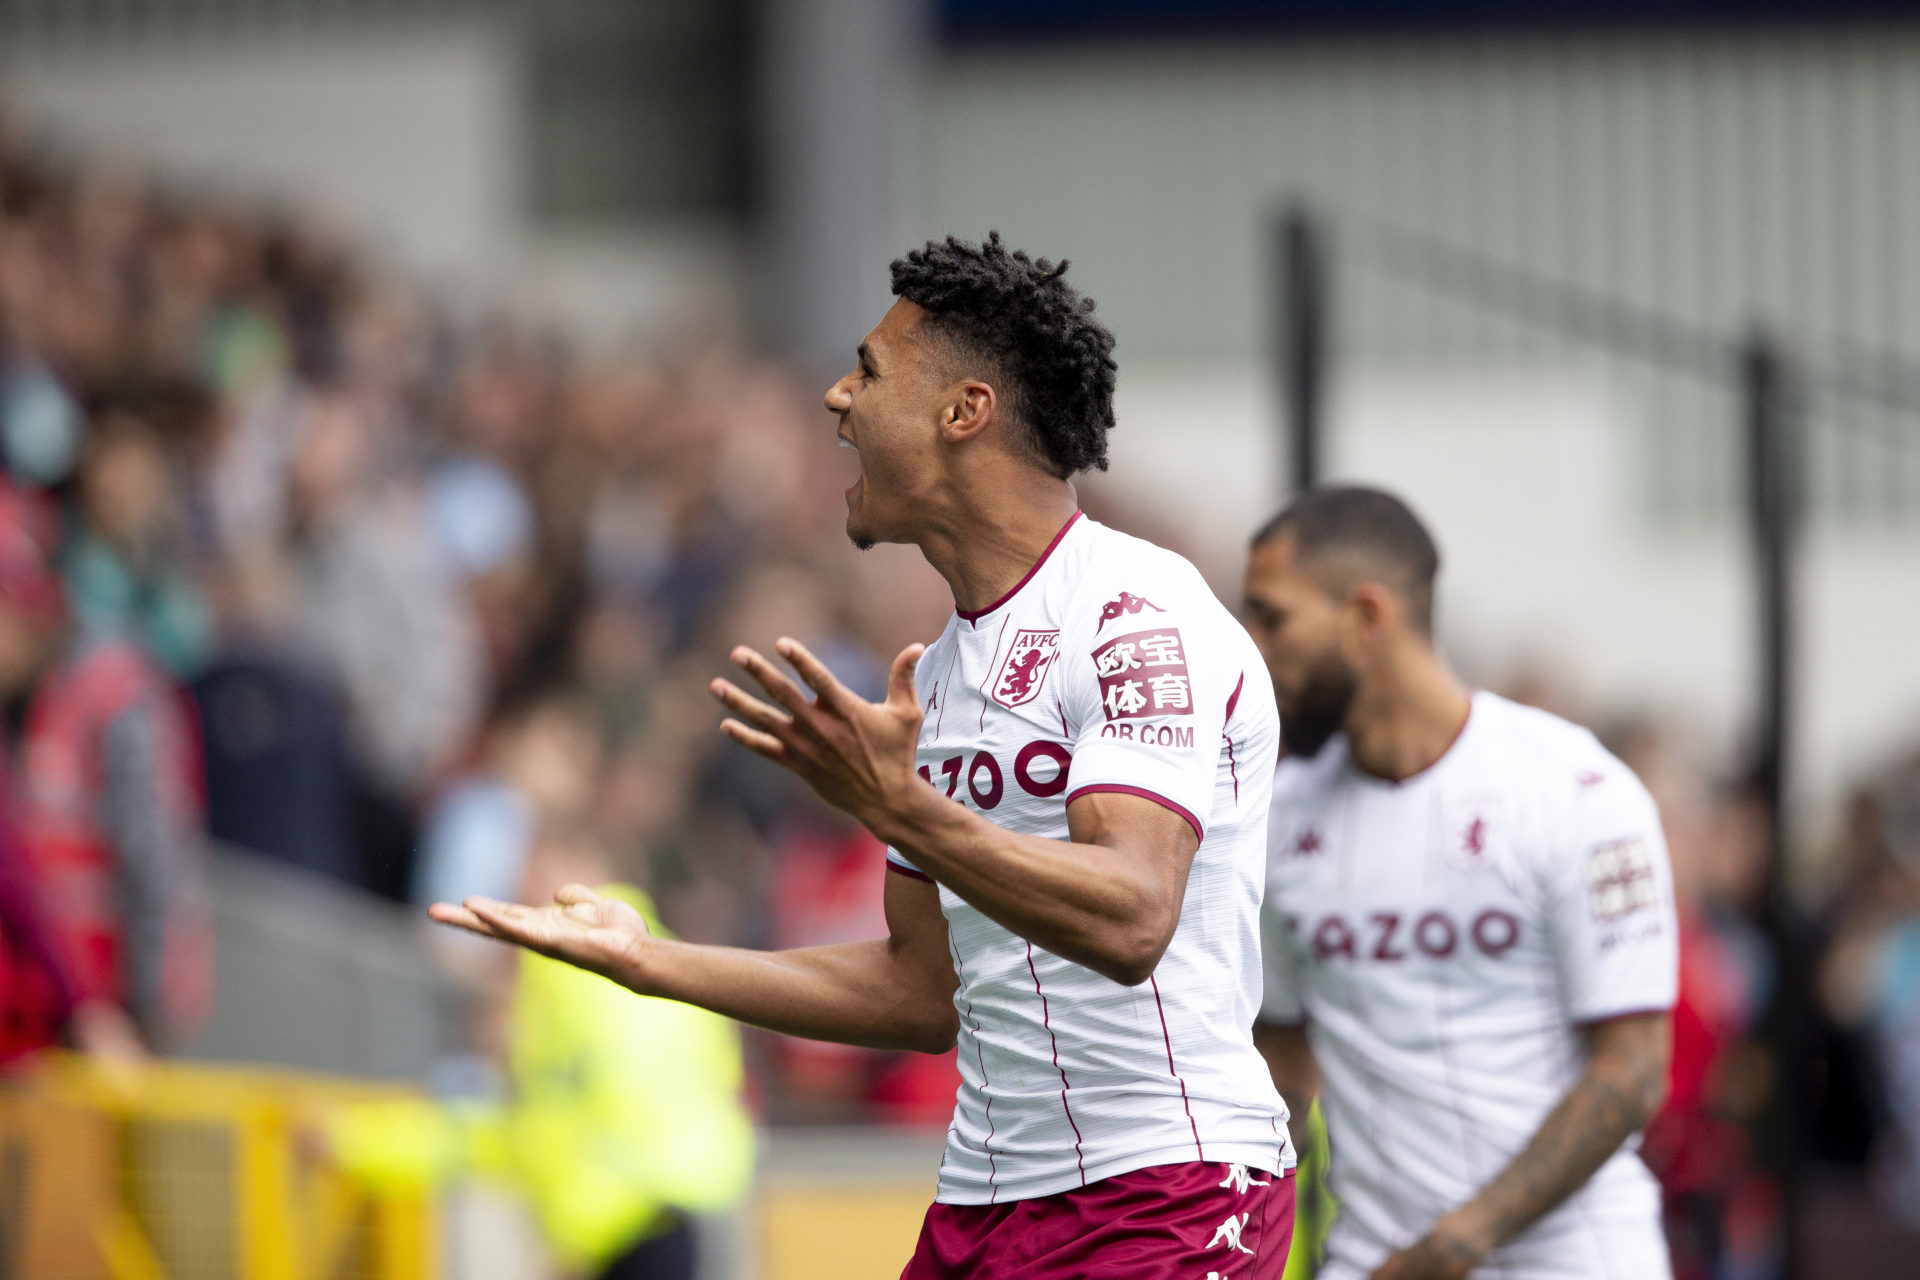 West Ham reportedly want to sign Aston Villa hitman Ollie Watkins this summer